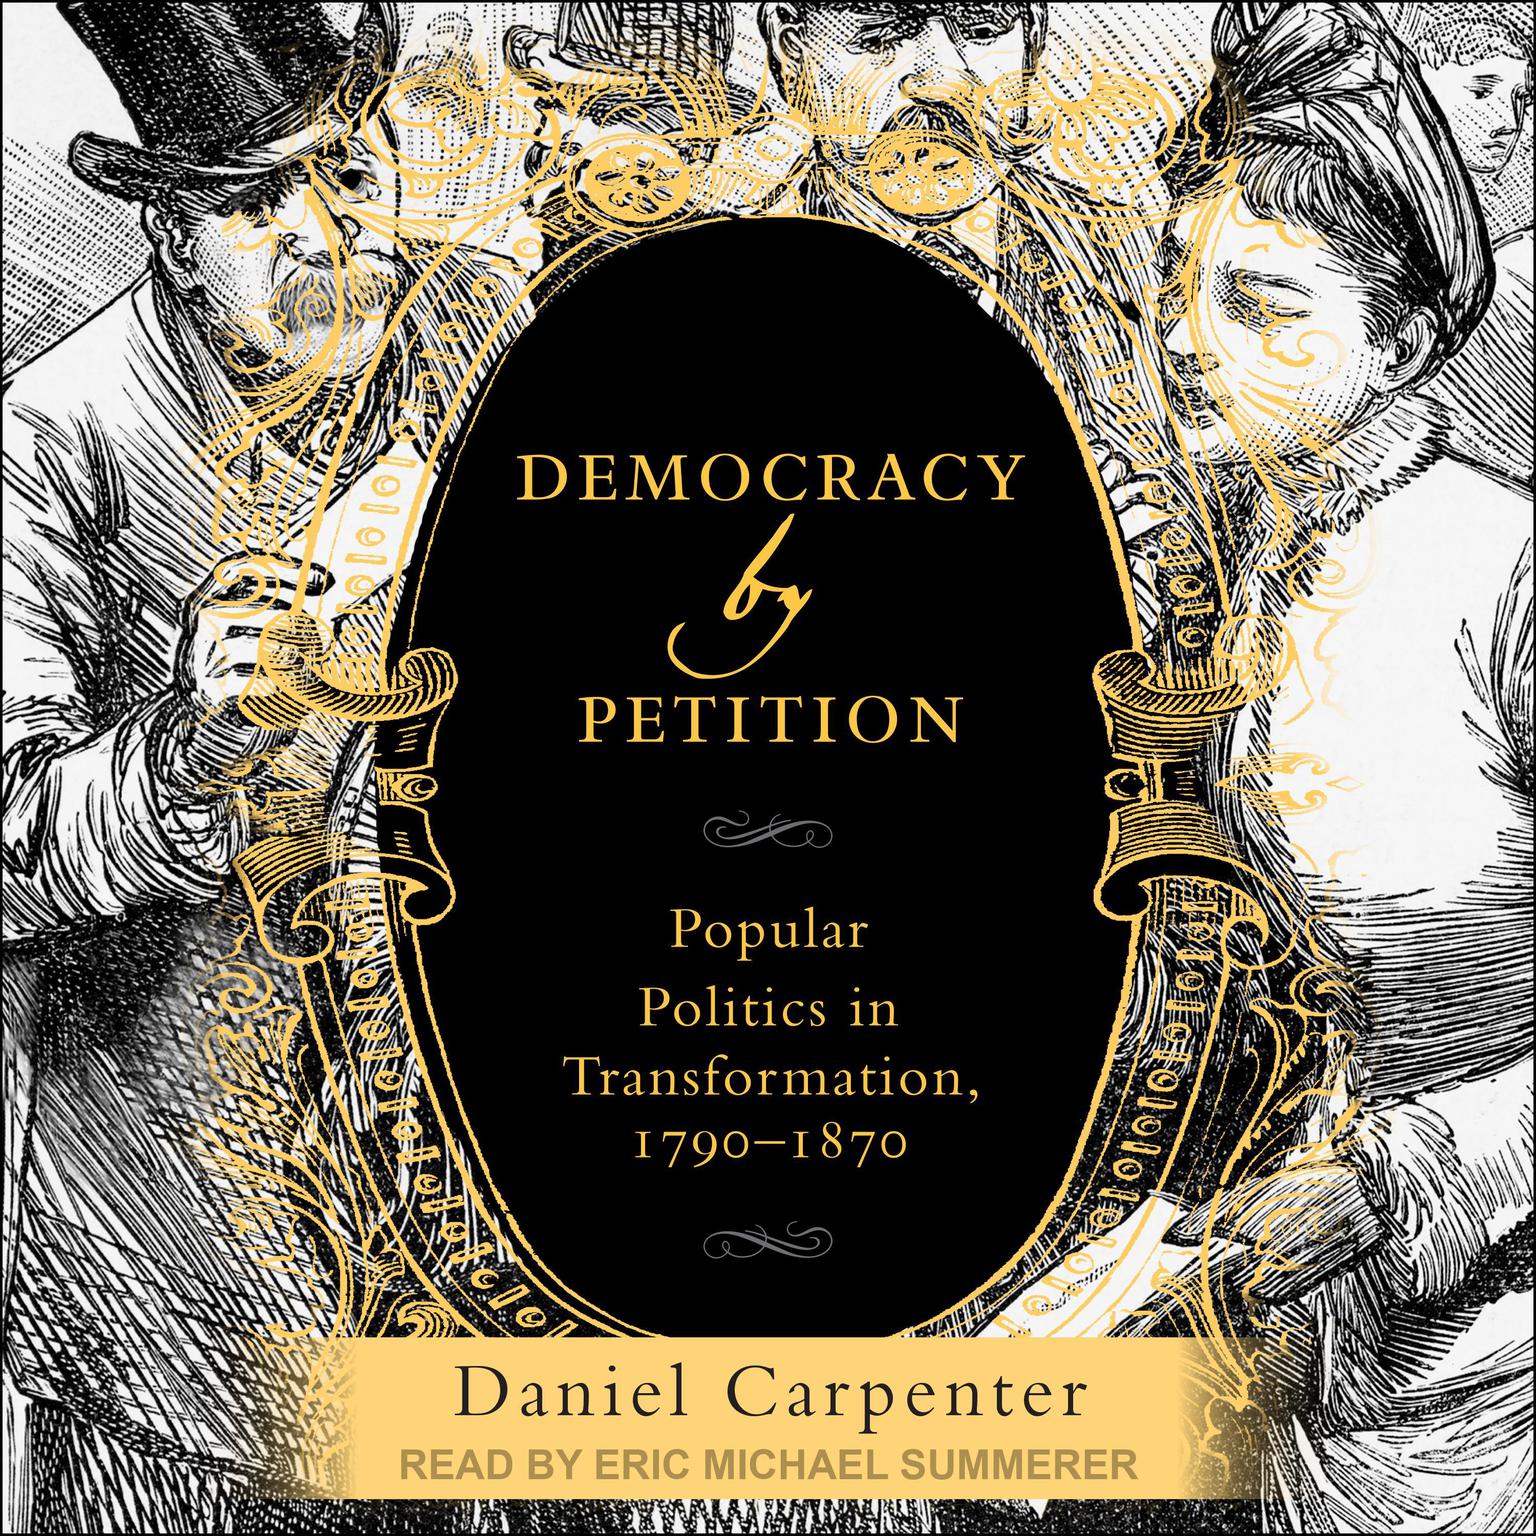 Democracy by Petition: Popular Politics in Transformation, 1790-1870 Audiobook, by Daniel Carpenter